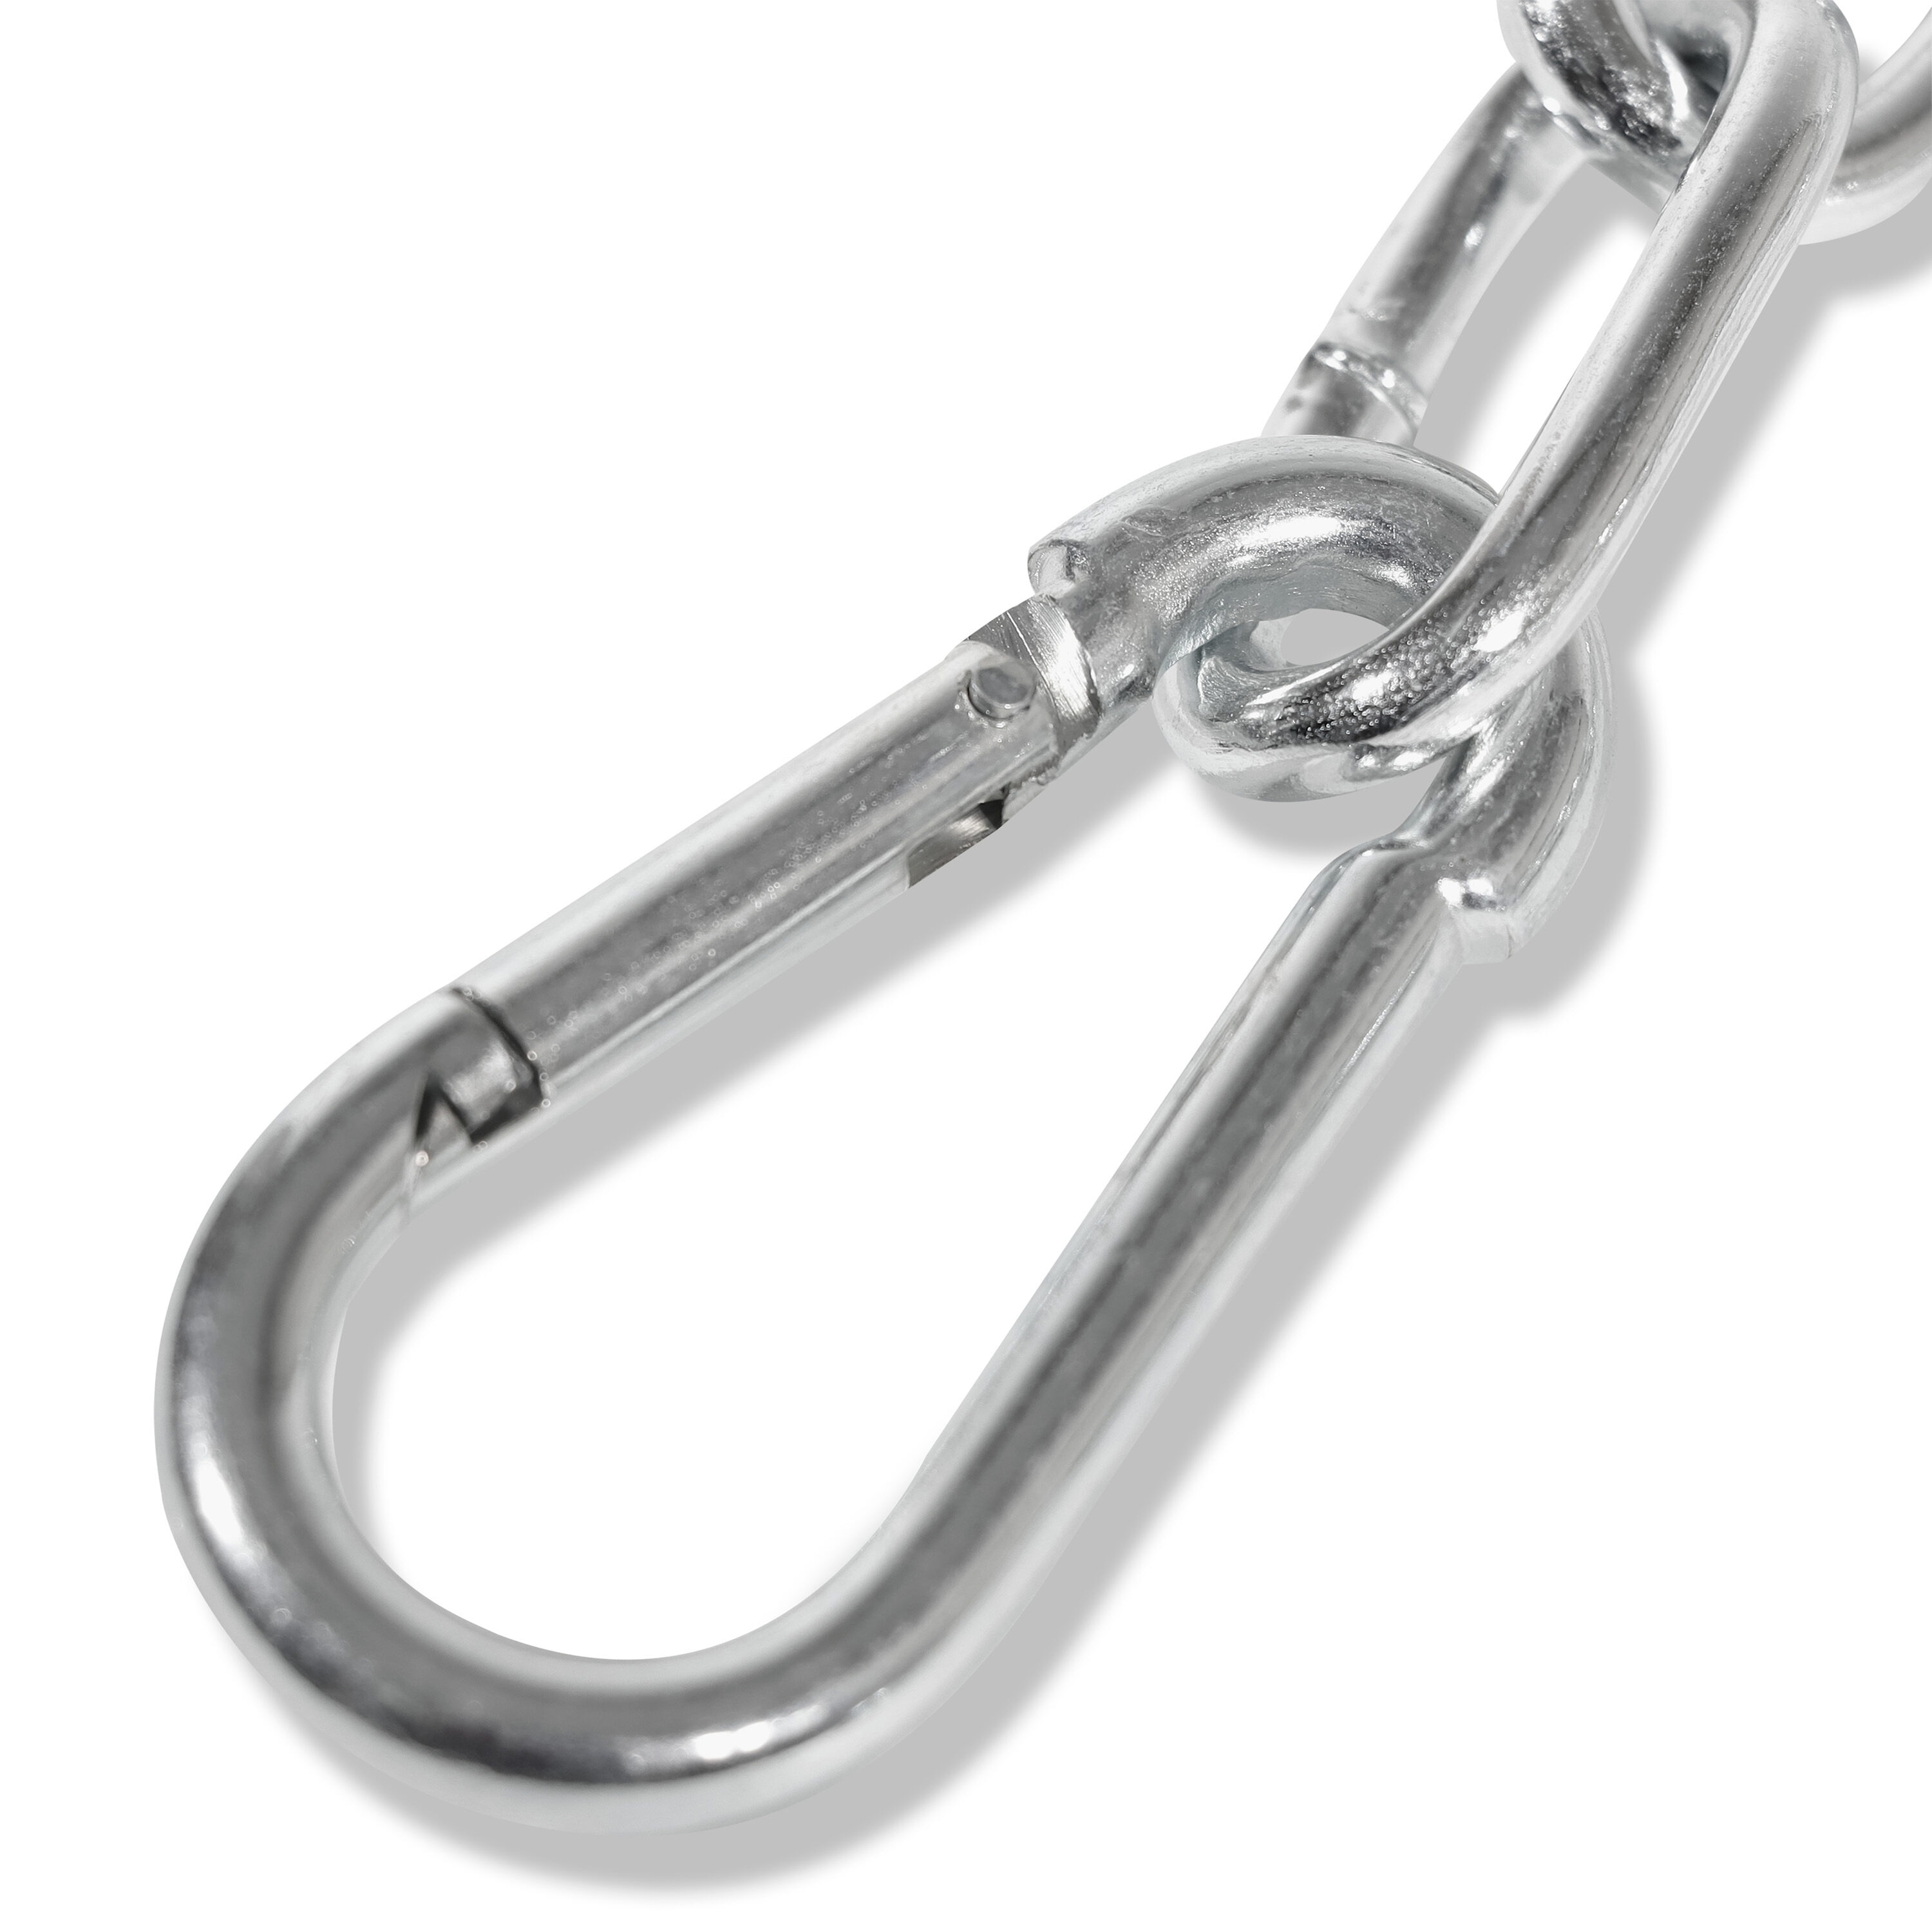 Trademark Innovations Heavy Bag Chains - 12-in Zinc Coated Steel Swivel Chains  for Boxing, Kickboxing, and MMA - Fits Bags up to 150lbs in the Sports  Equipment department at